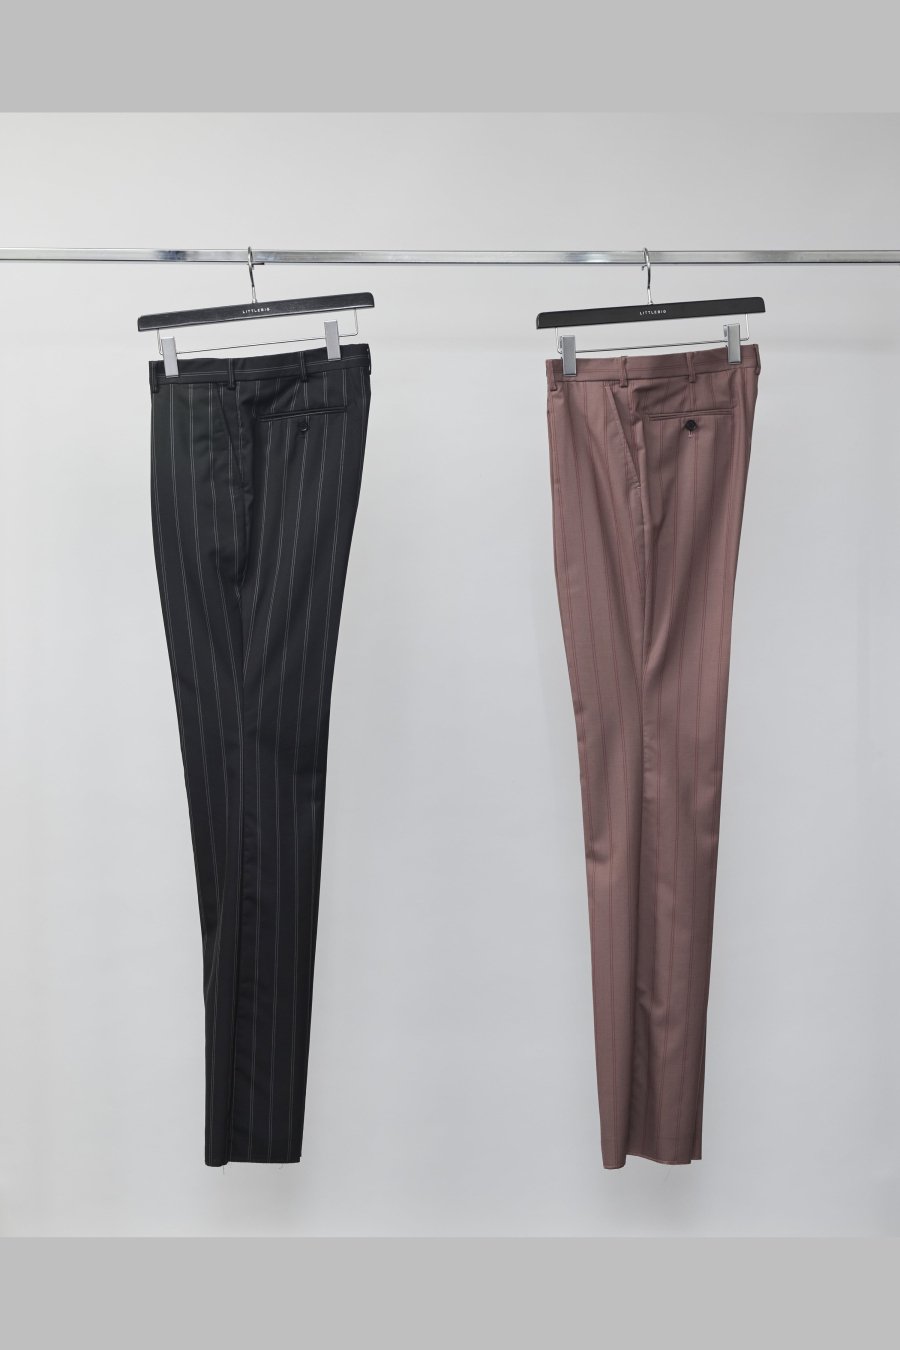 LITTLEBIG  22ss Tucked Flare Trousers（Black or Pink）
<img class='new_mark_img2' src='https://img.shop-pro.jp/img/new/icons15.gif' style='border:none;display:inline;margin:0px;padding:0px;width:auto;' />